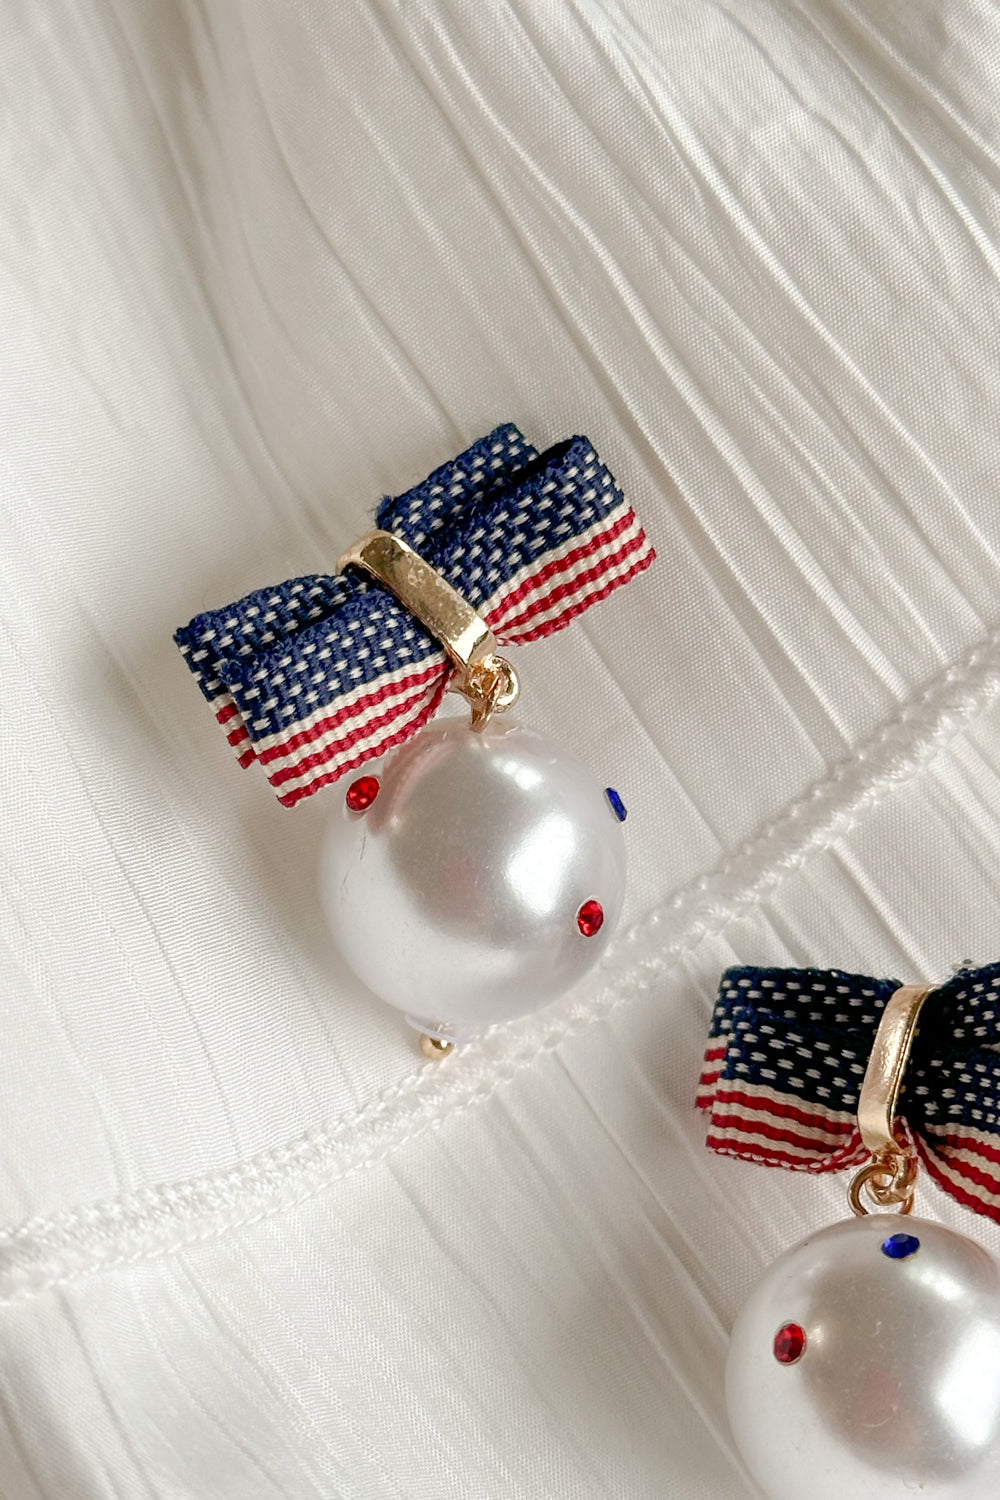 Close-up image of the Betsy Red, White, & Blue Pearl Earrings against a white background. Earrings have american flag bows and a pearl pendant with red white and blue stones.